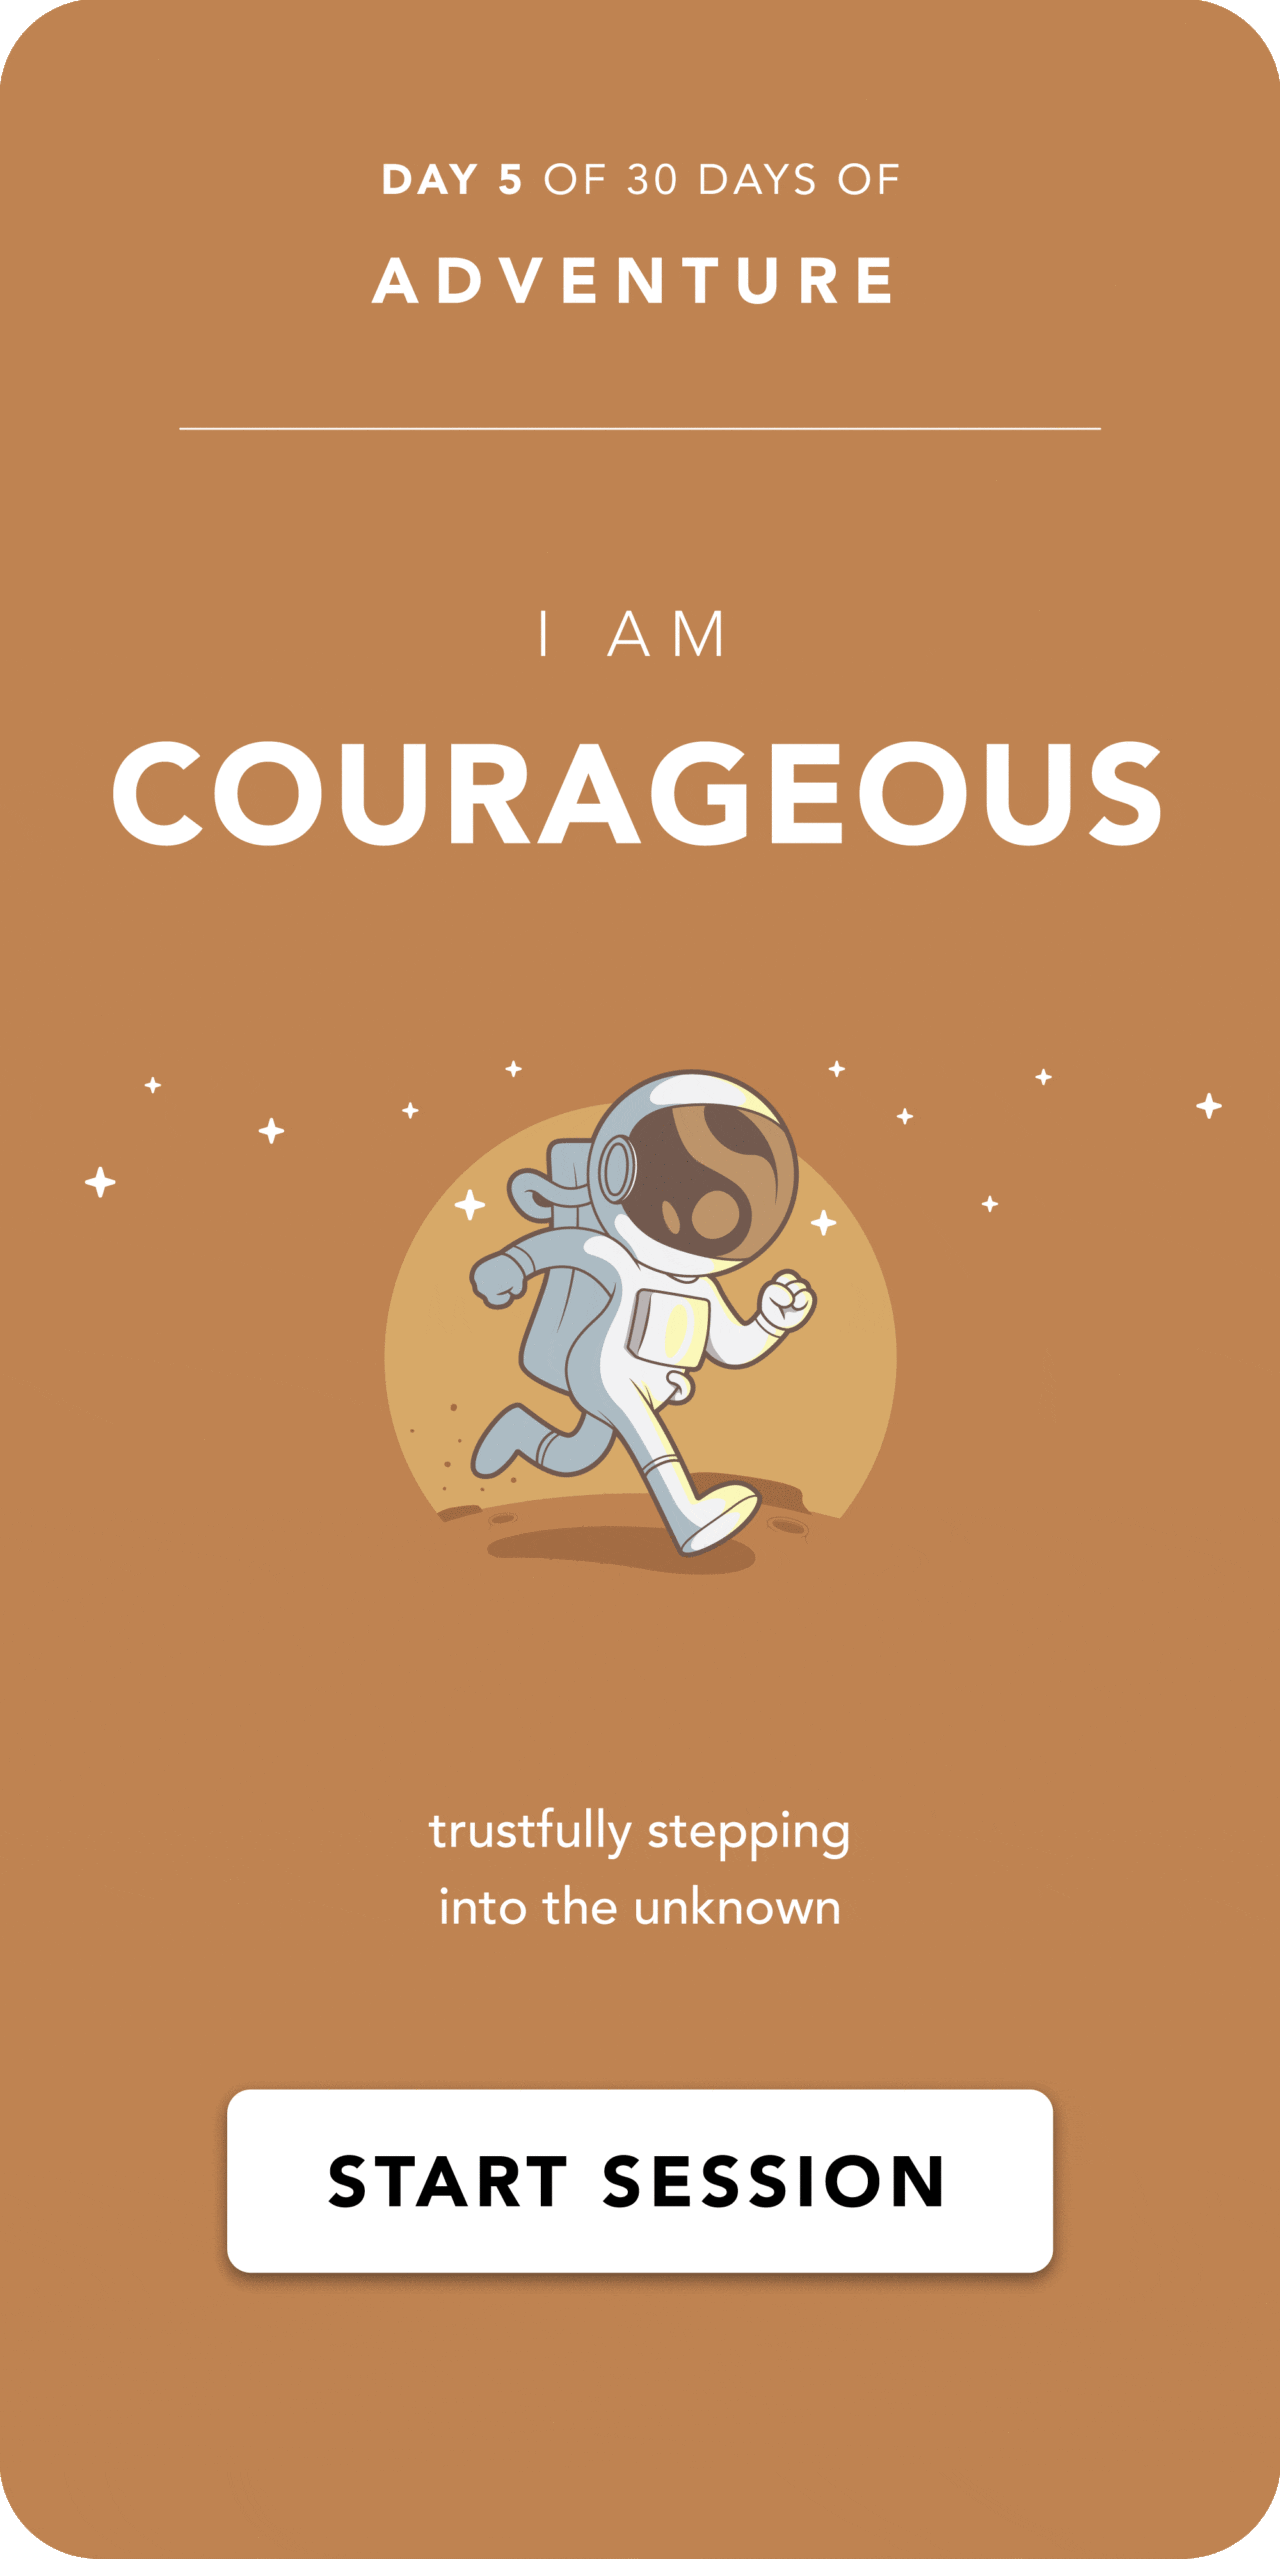 I AM COURAGEOUS